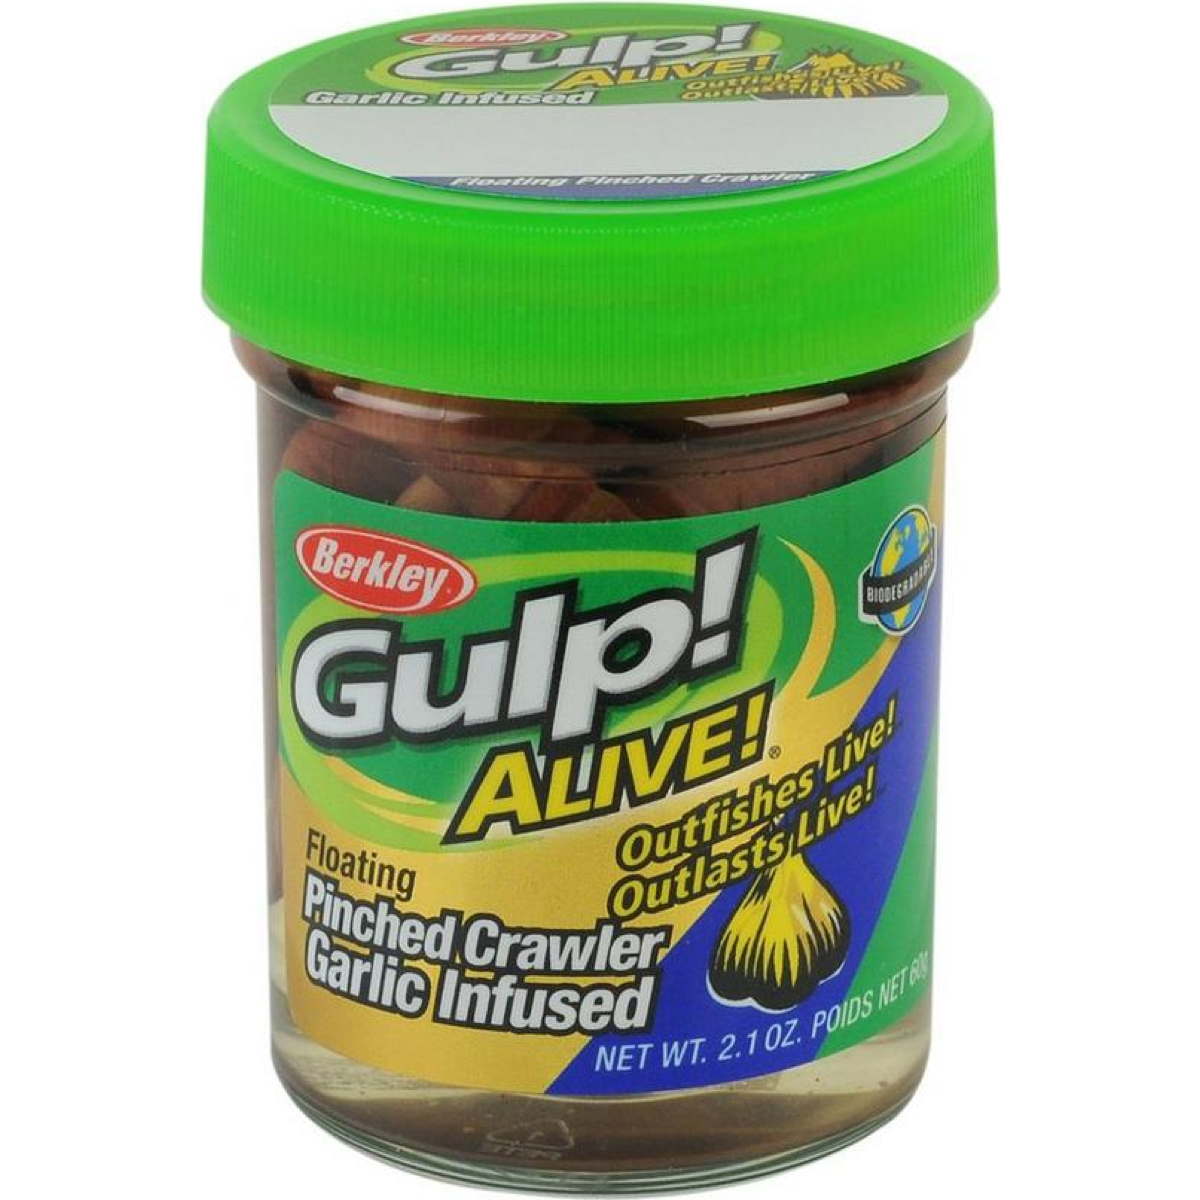 Photo of Berkley Gulp! Alive Floating Pinched Crawler for sale at United Tackle Shops.